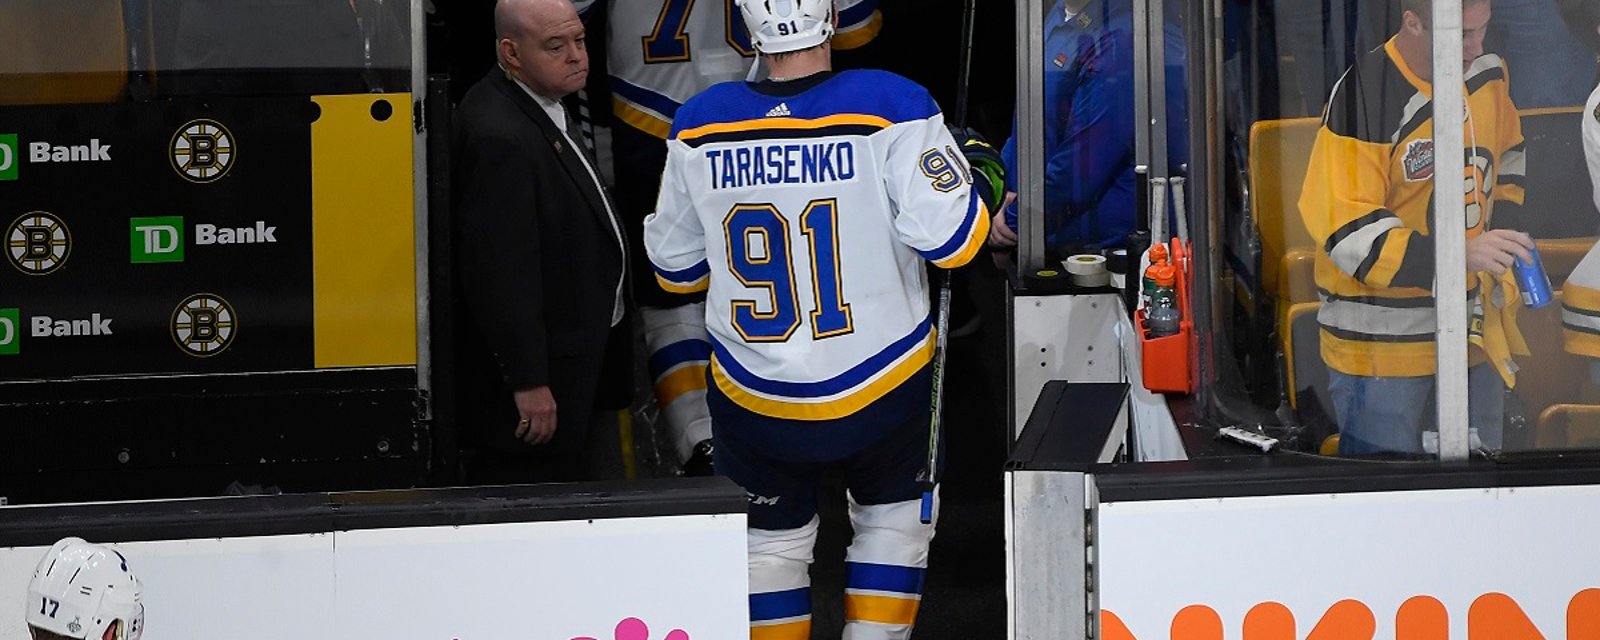 Tarasenko faces the toughest challenge of his life before Game 6.